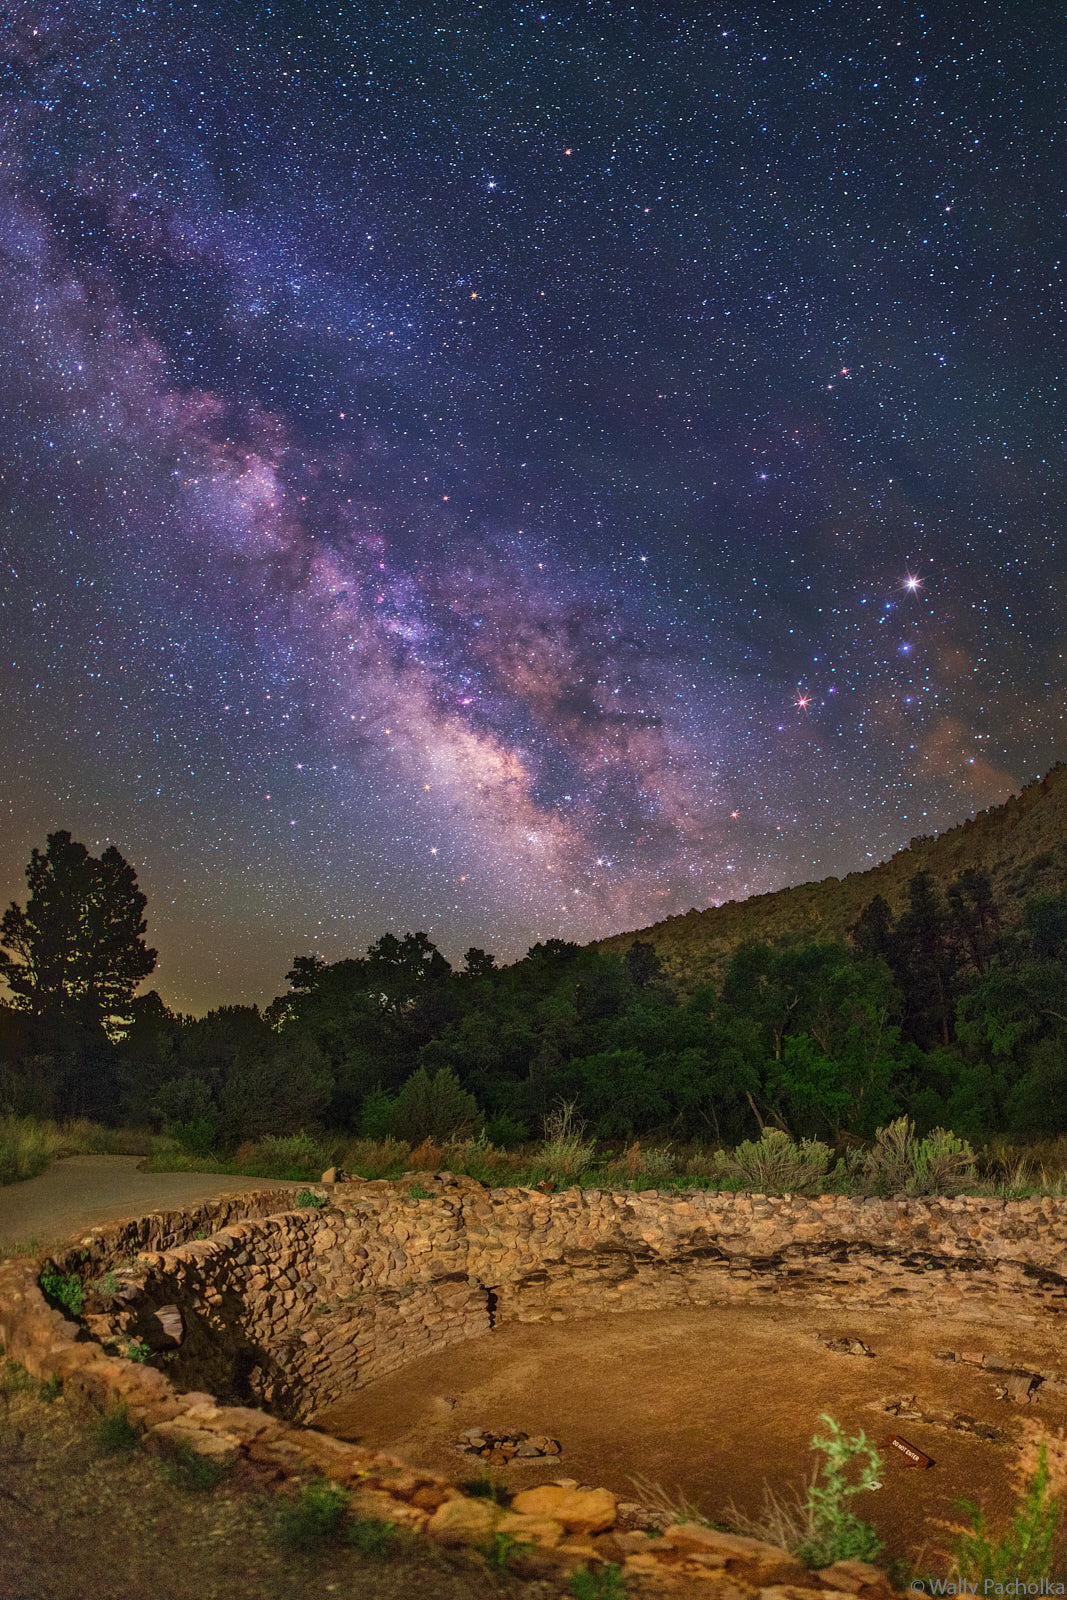 The Milky Way rises over an old indian ceremonial Kiva in Bandelier National Monument.